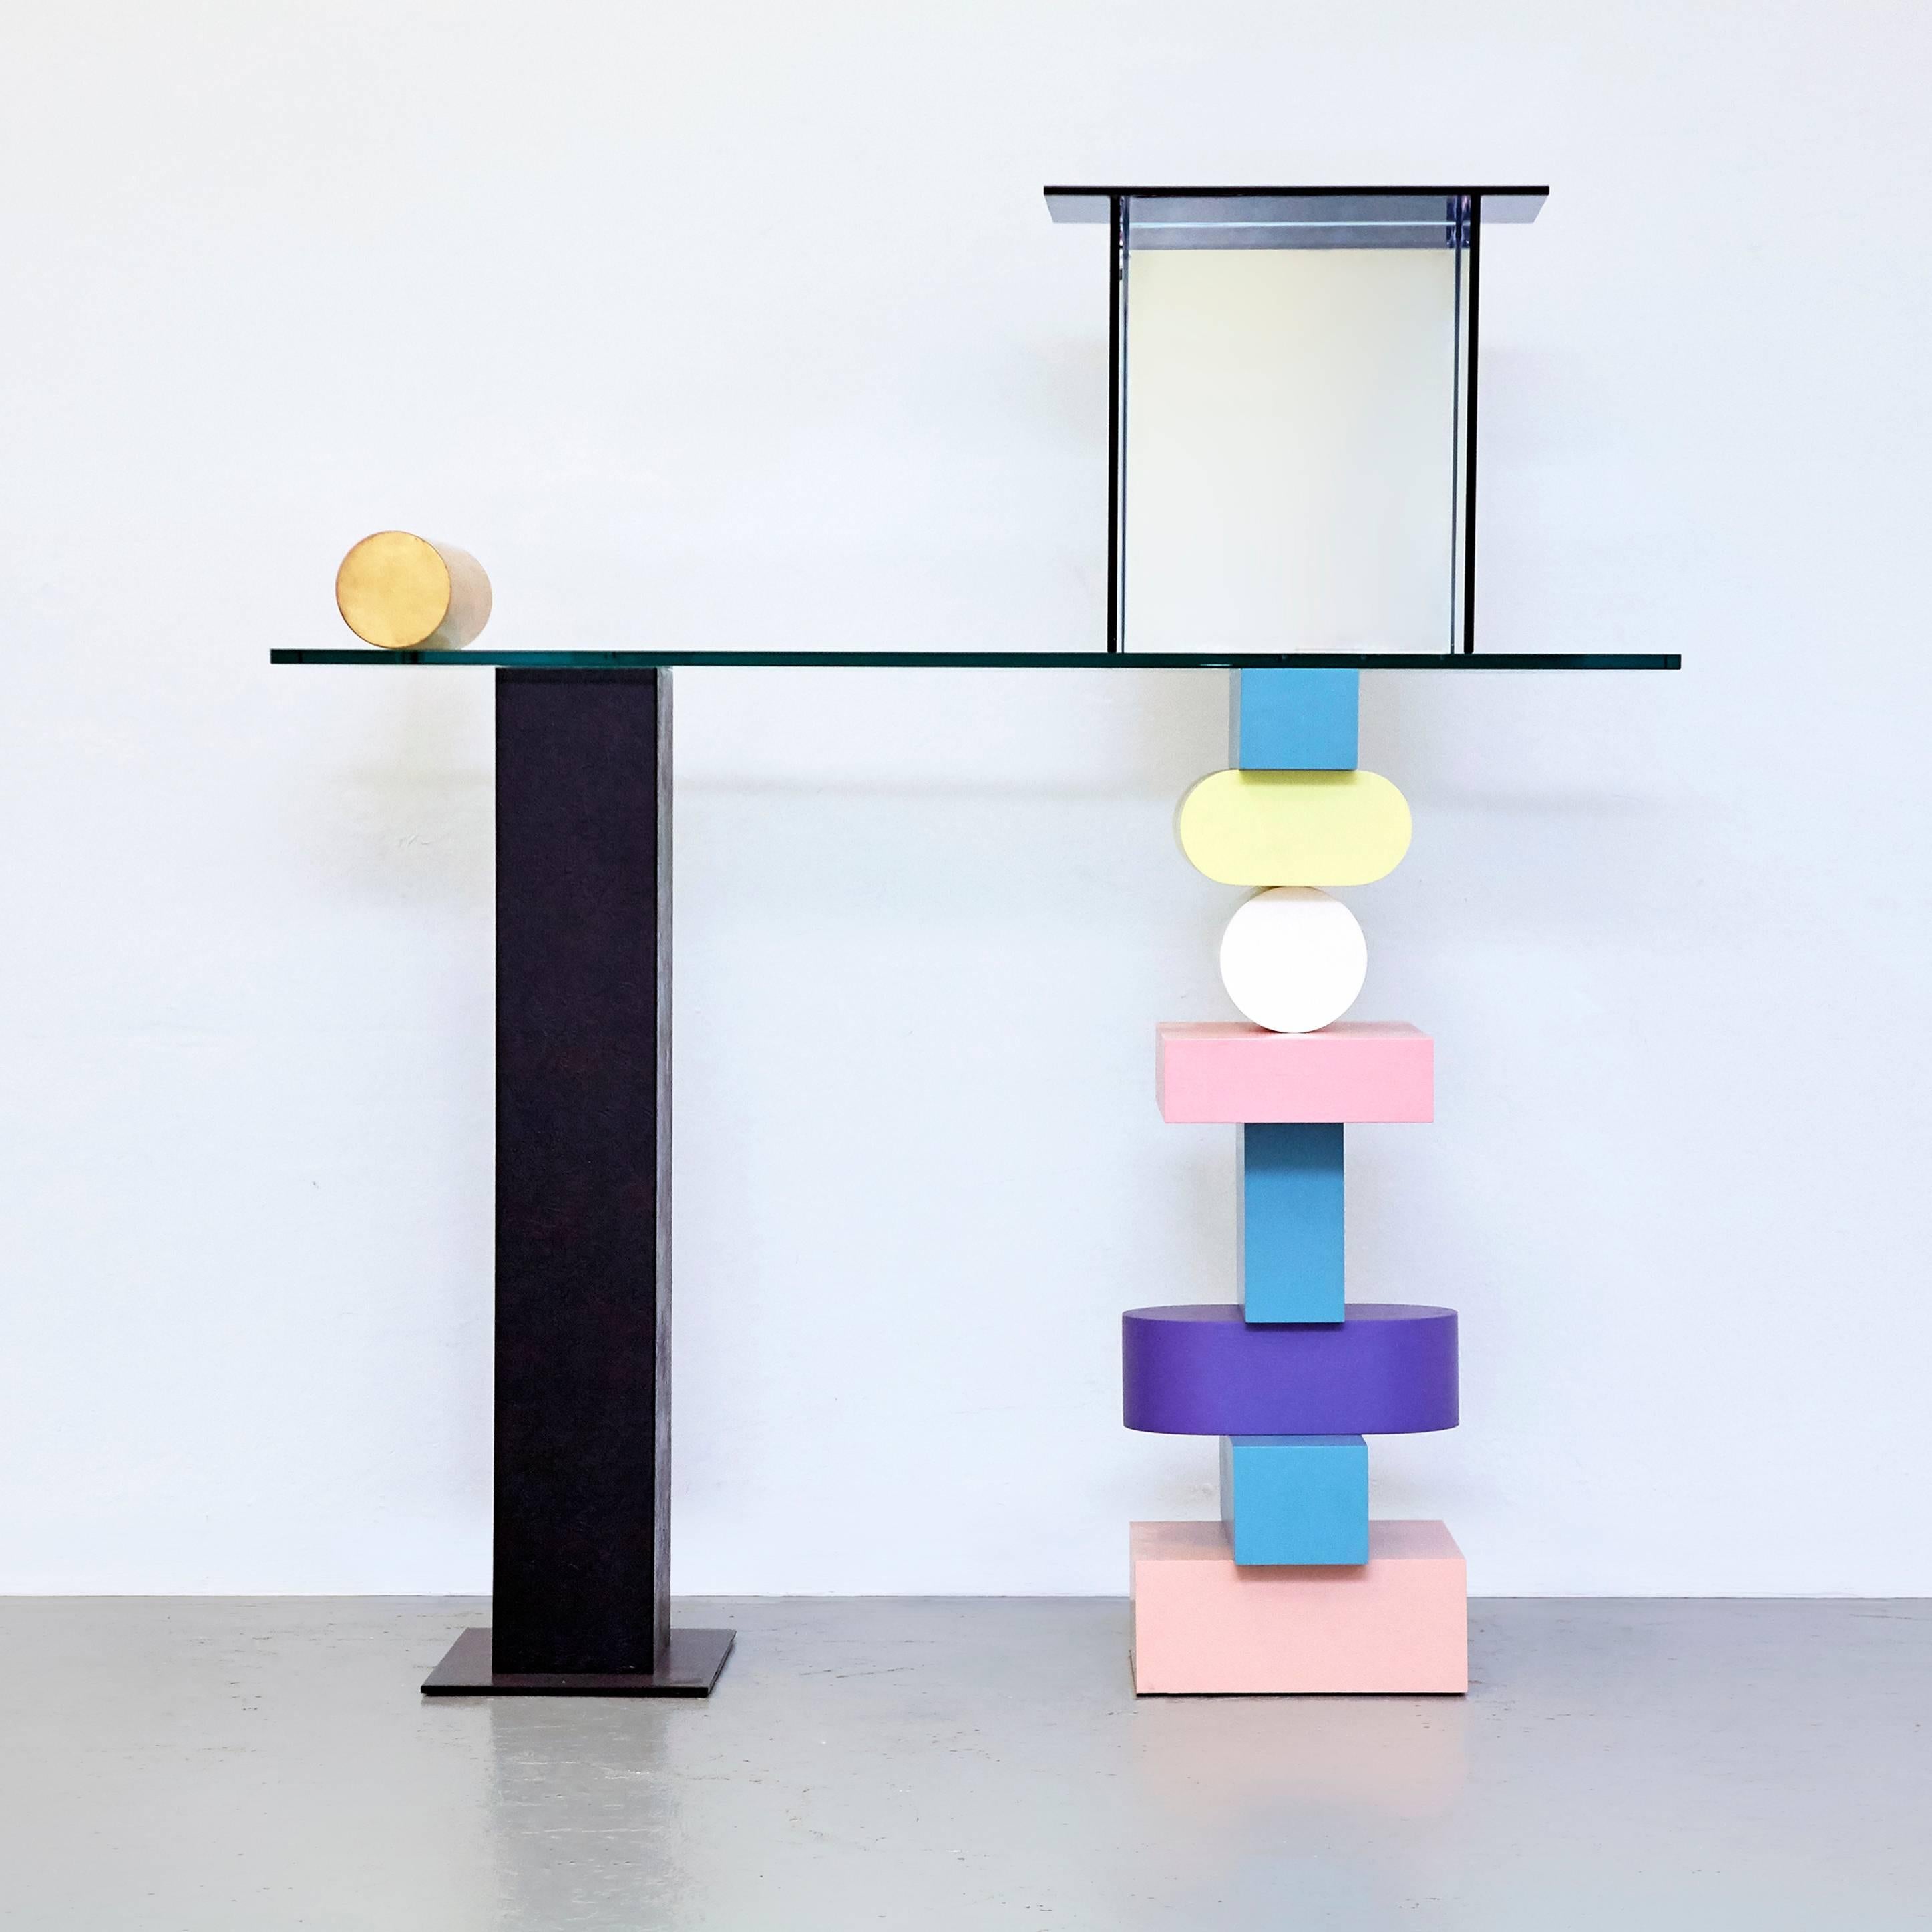 Console Designed by Ettore Sottsass in Italy manufactured by Design Gallery Milano in 1922.

In lacquered and giled wood with metal leg.
Top in blue glass and mirror.

Limited edition of nine signed and numered pieces, number 2 / 9.

In good